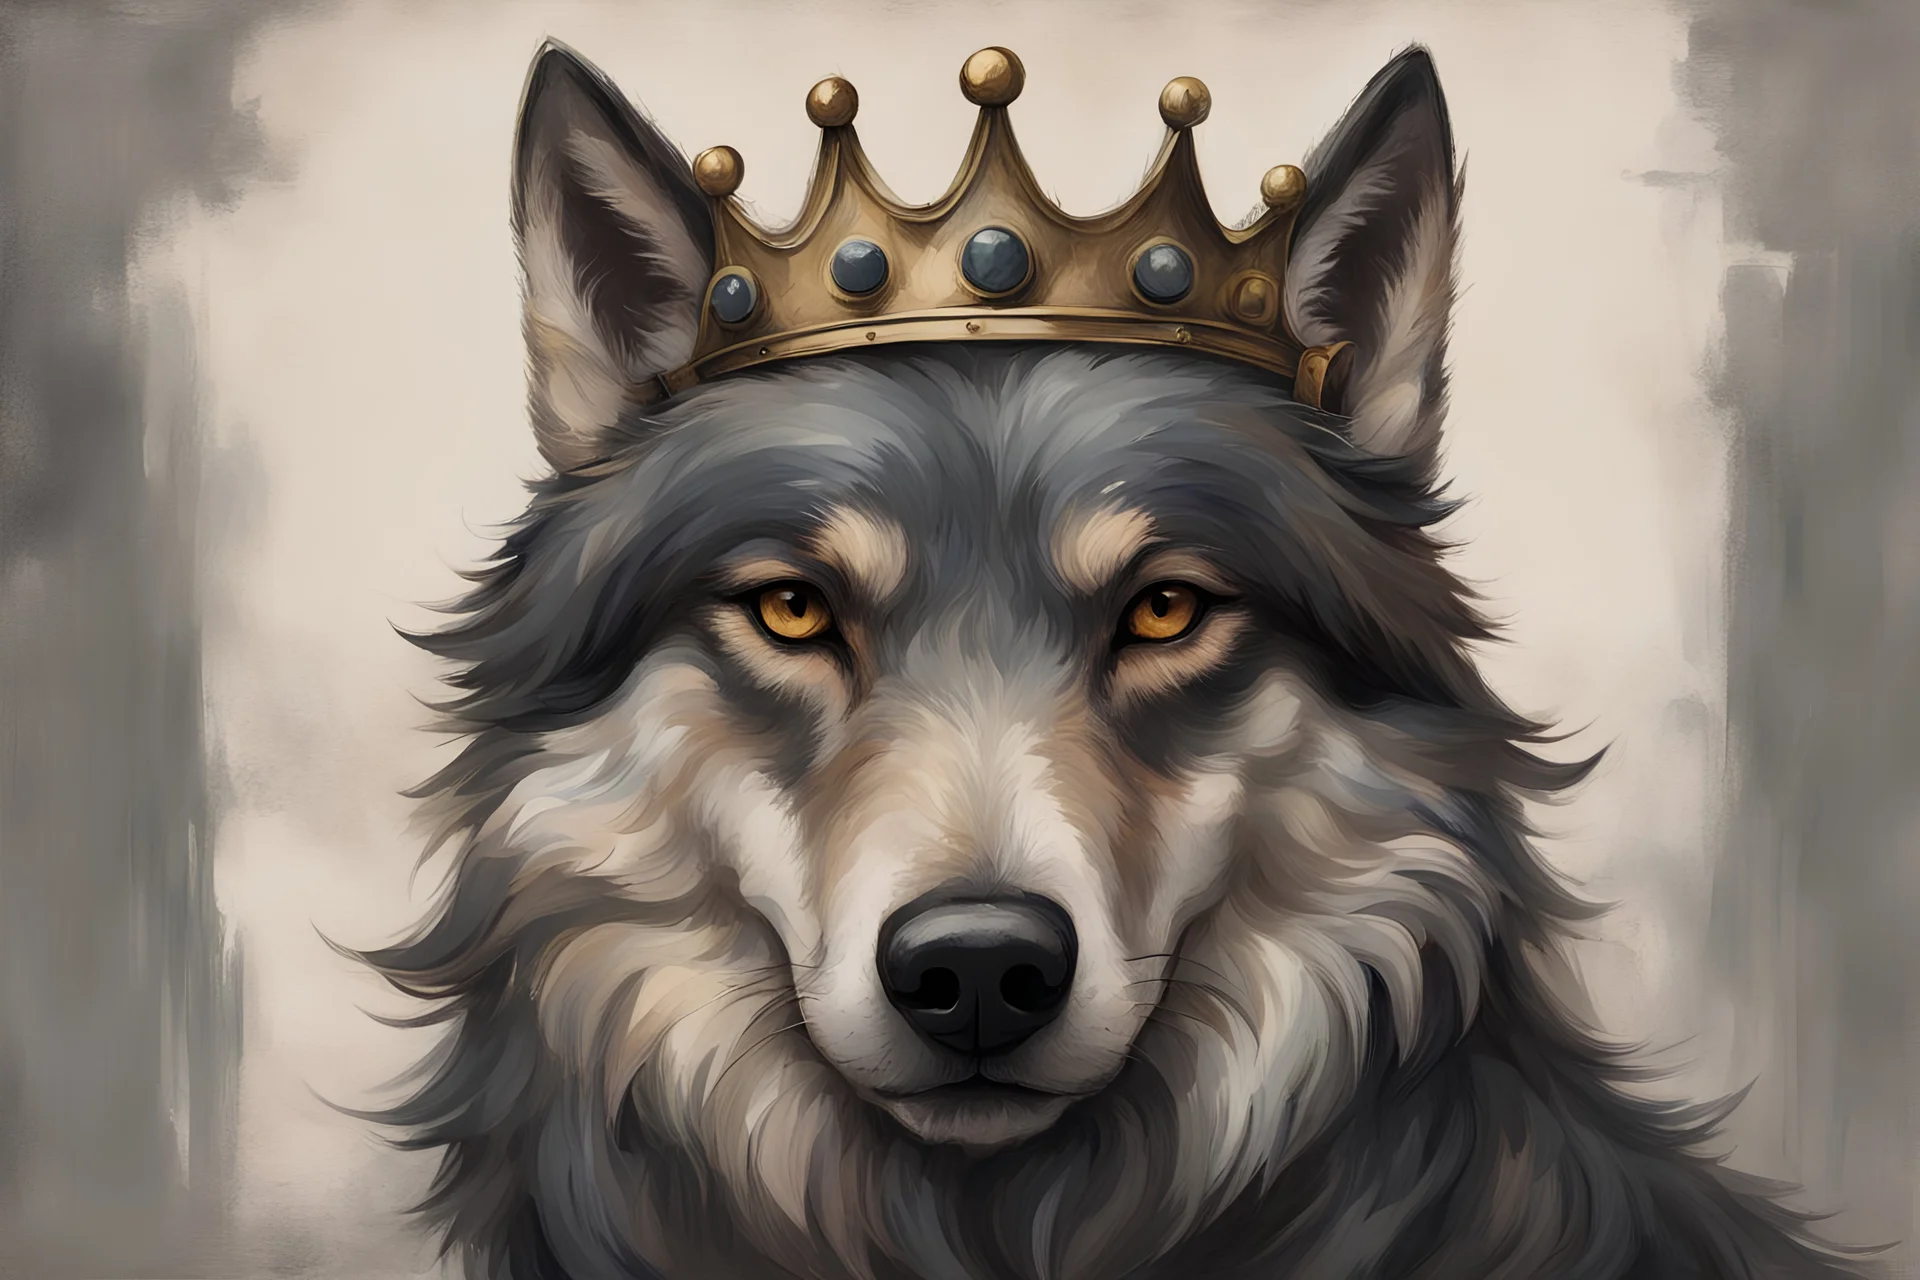 ohn william waterhouse style, a One-eyed wolf with a crown upon his head